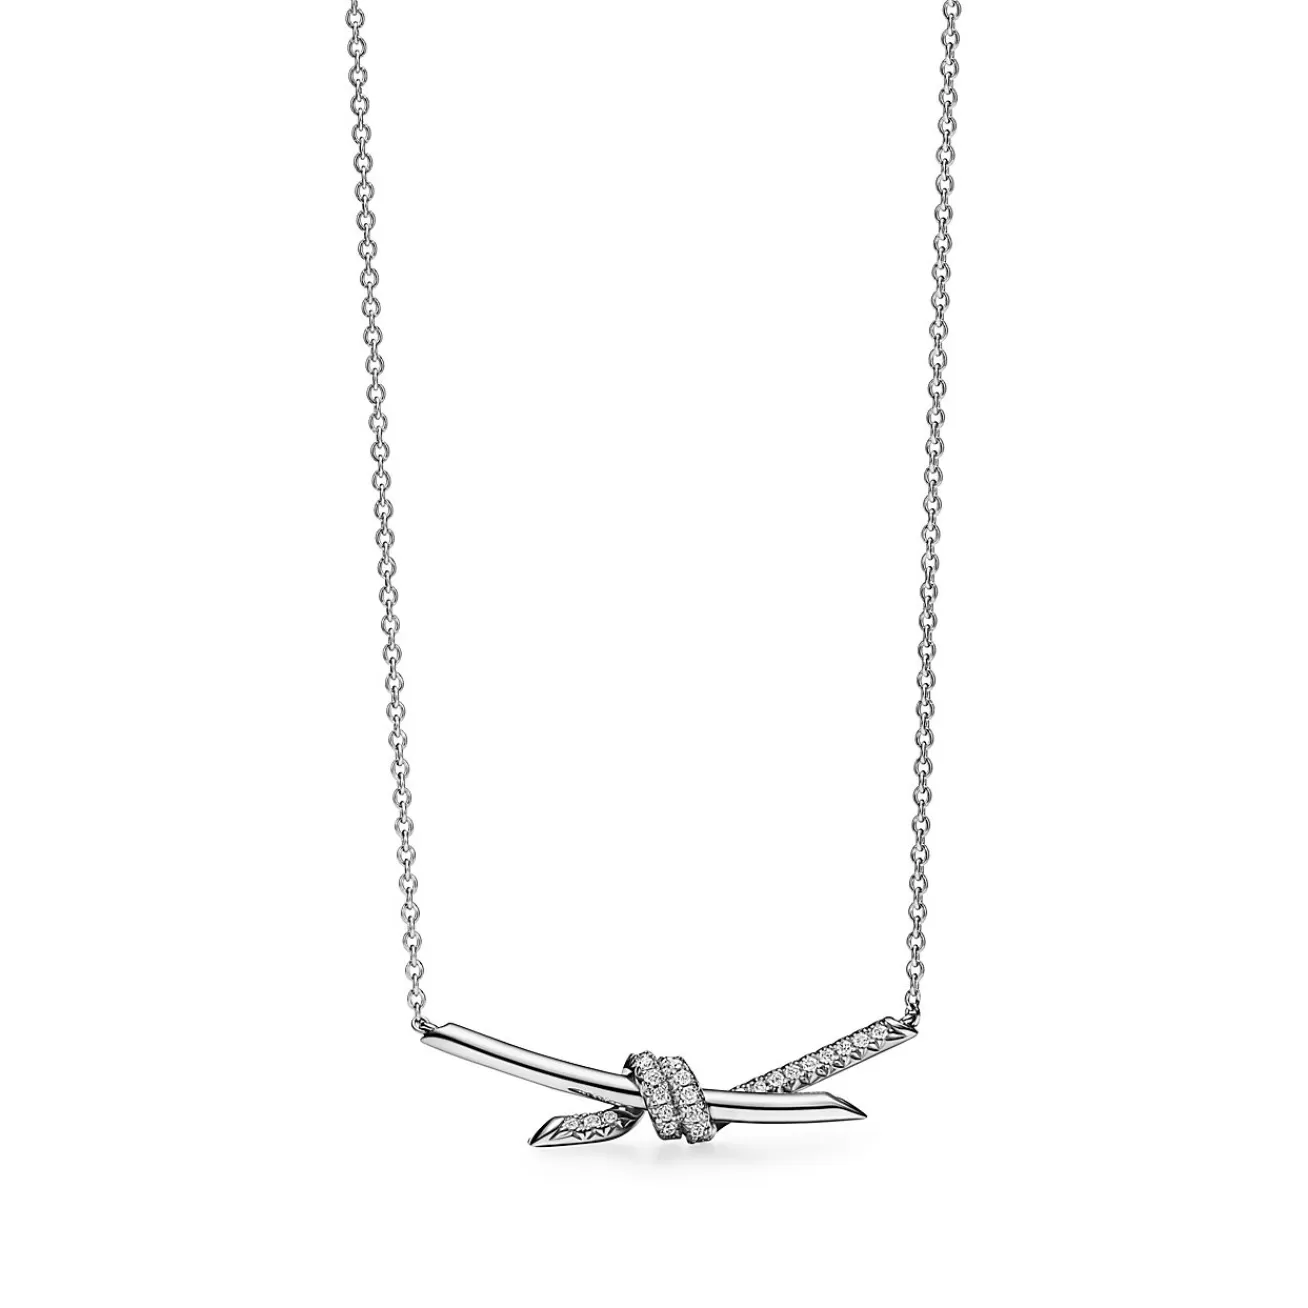 Tiffany & Co. Tiffany Knot Pendant in White Gold with Diamonds | ^ Necklaces & Pendants | Men's Jewelry